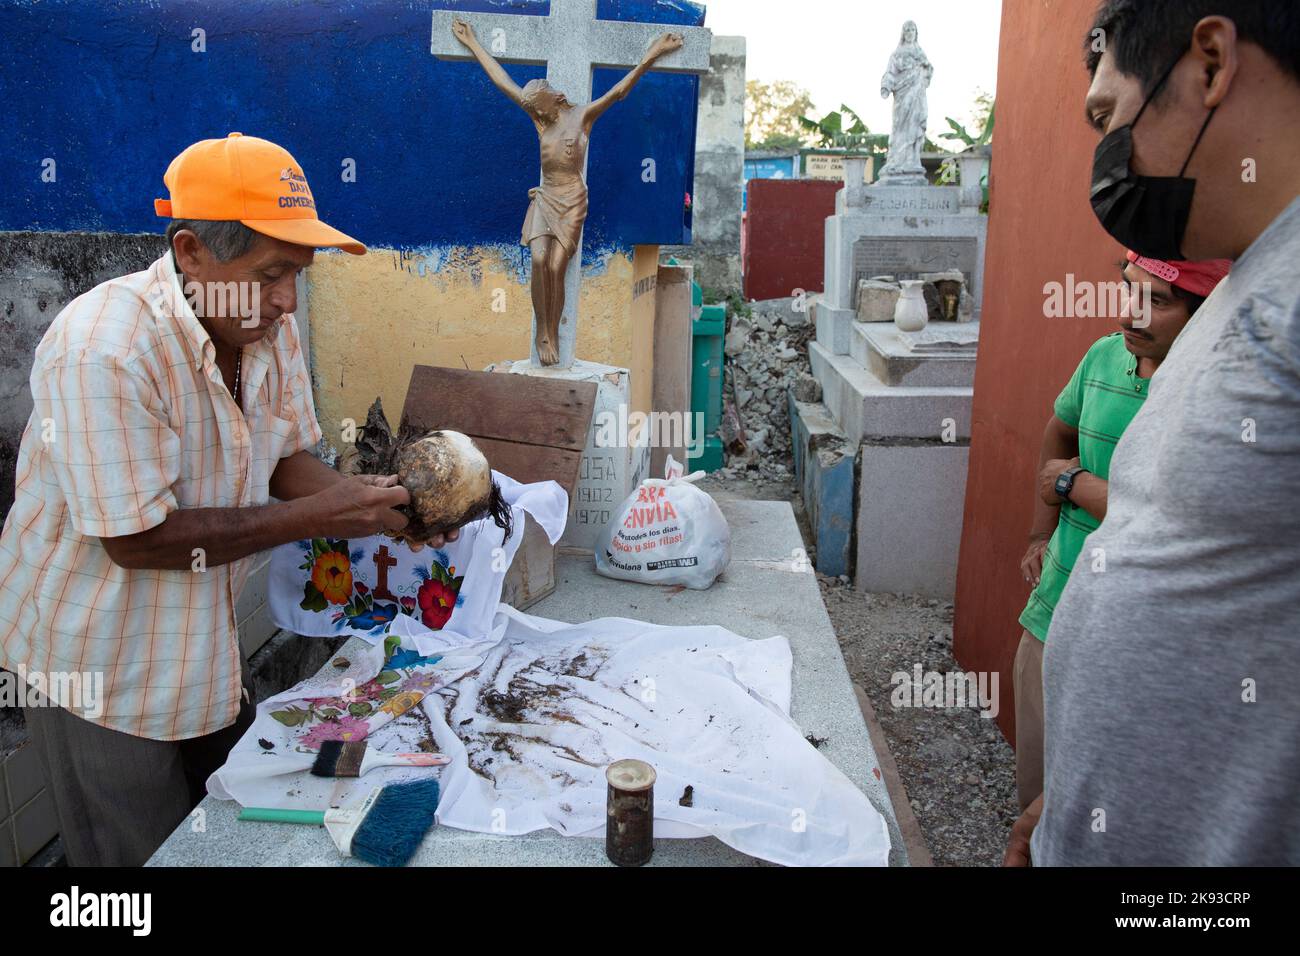 Don Venancio Tuz Chi, one of the administrators of the Pomuch cemetery, cleaning the bones and skulls of a deceased relative of the Colli Ycauch family at the cemetery of Pomuch, Campeche state, Mexico on October 22, 2022. Don Venancio has been a hired bone cleaner for over twenty years, he is paid $1.50 per skeleton. Every year in preparation for Hanal Pixán, the Mayan Day of the Dead celebration, members of the Pomuch community in southeastern Mexico extract bones from their niches and carefully clean them – an ancestral tradition seen as a gesture of love and a way to get closer to deceased Stock Photo